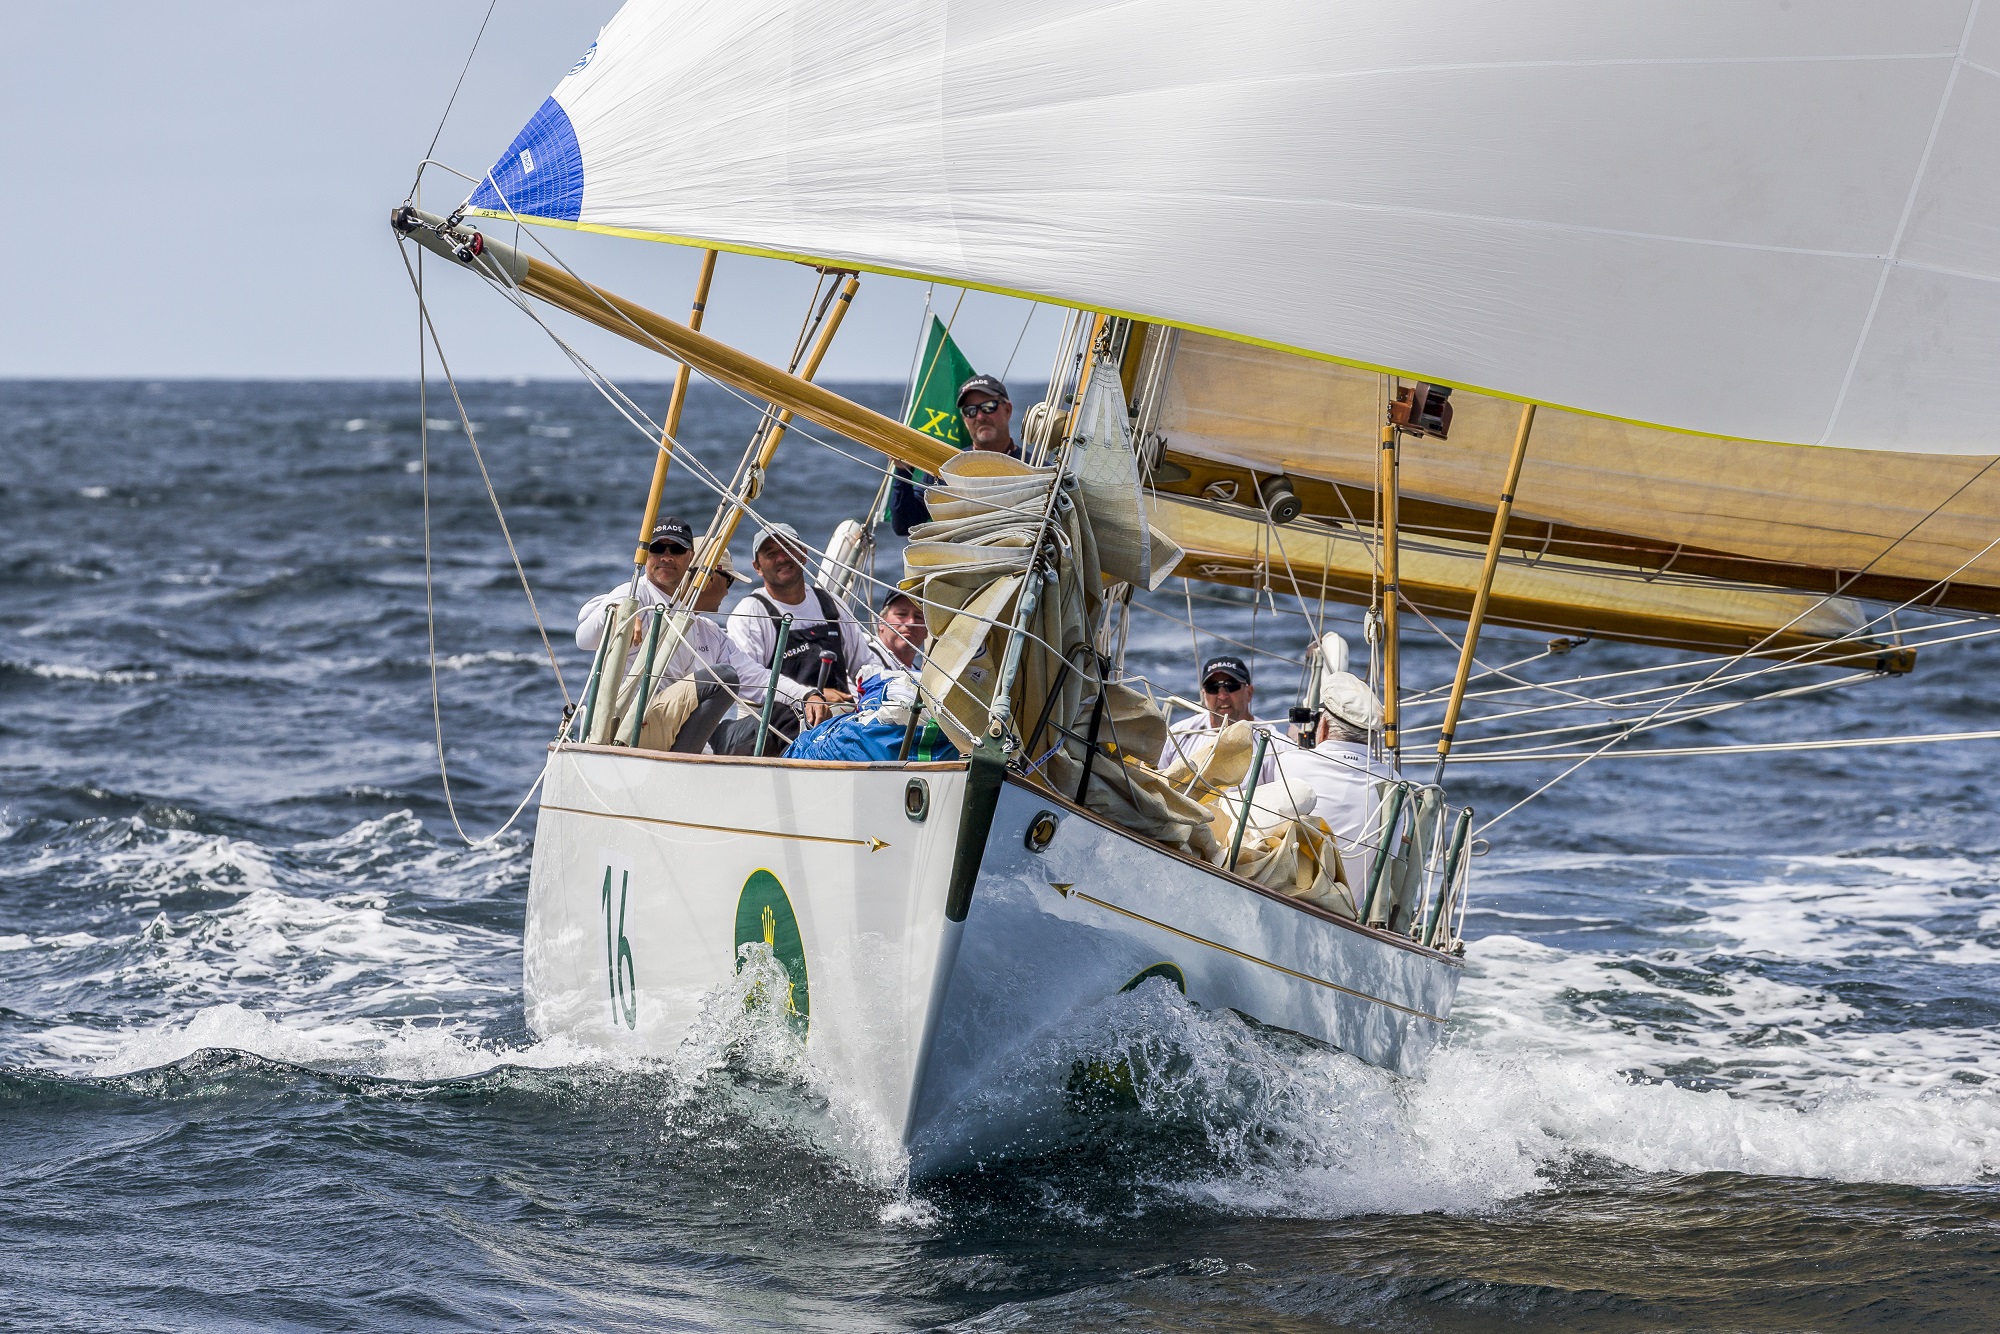 Rolex World of Yachting highlights Dorade in its coverage of … Read the rest